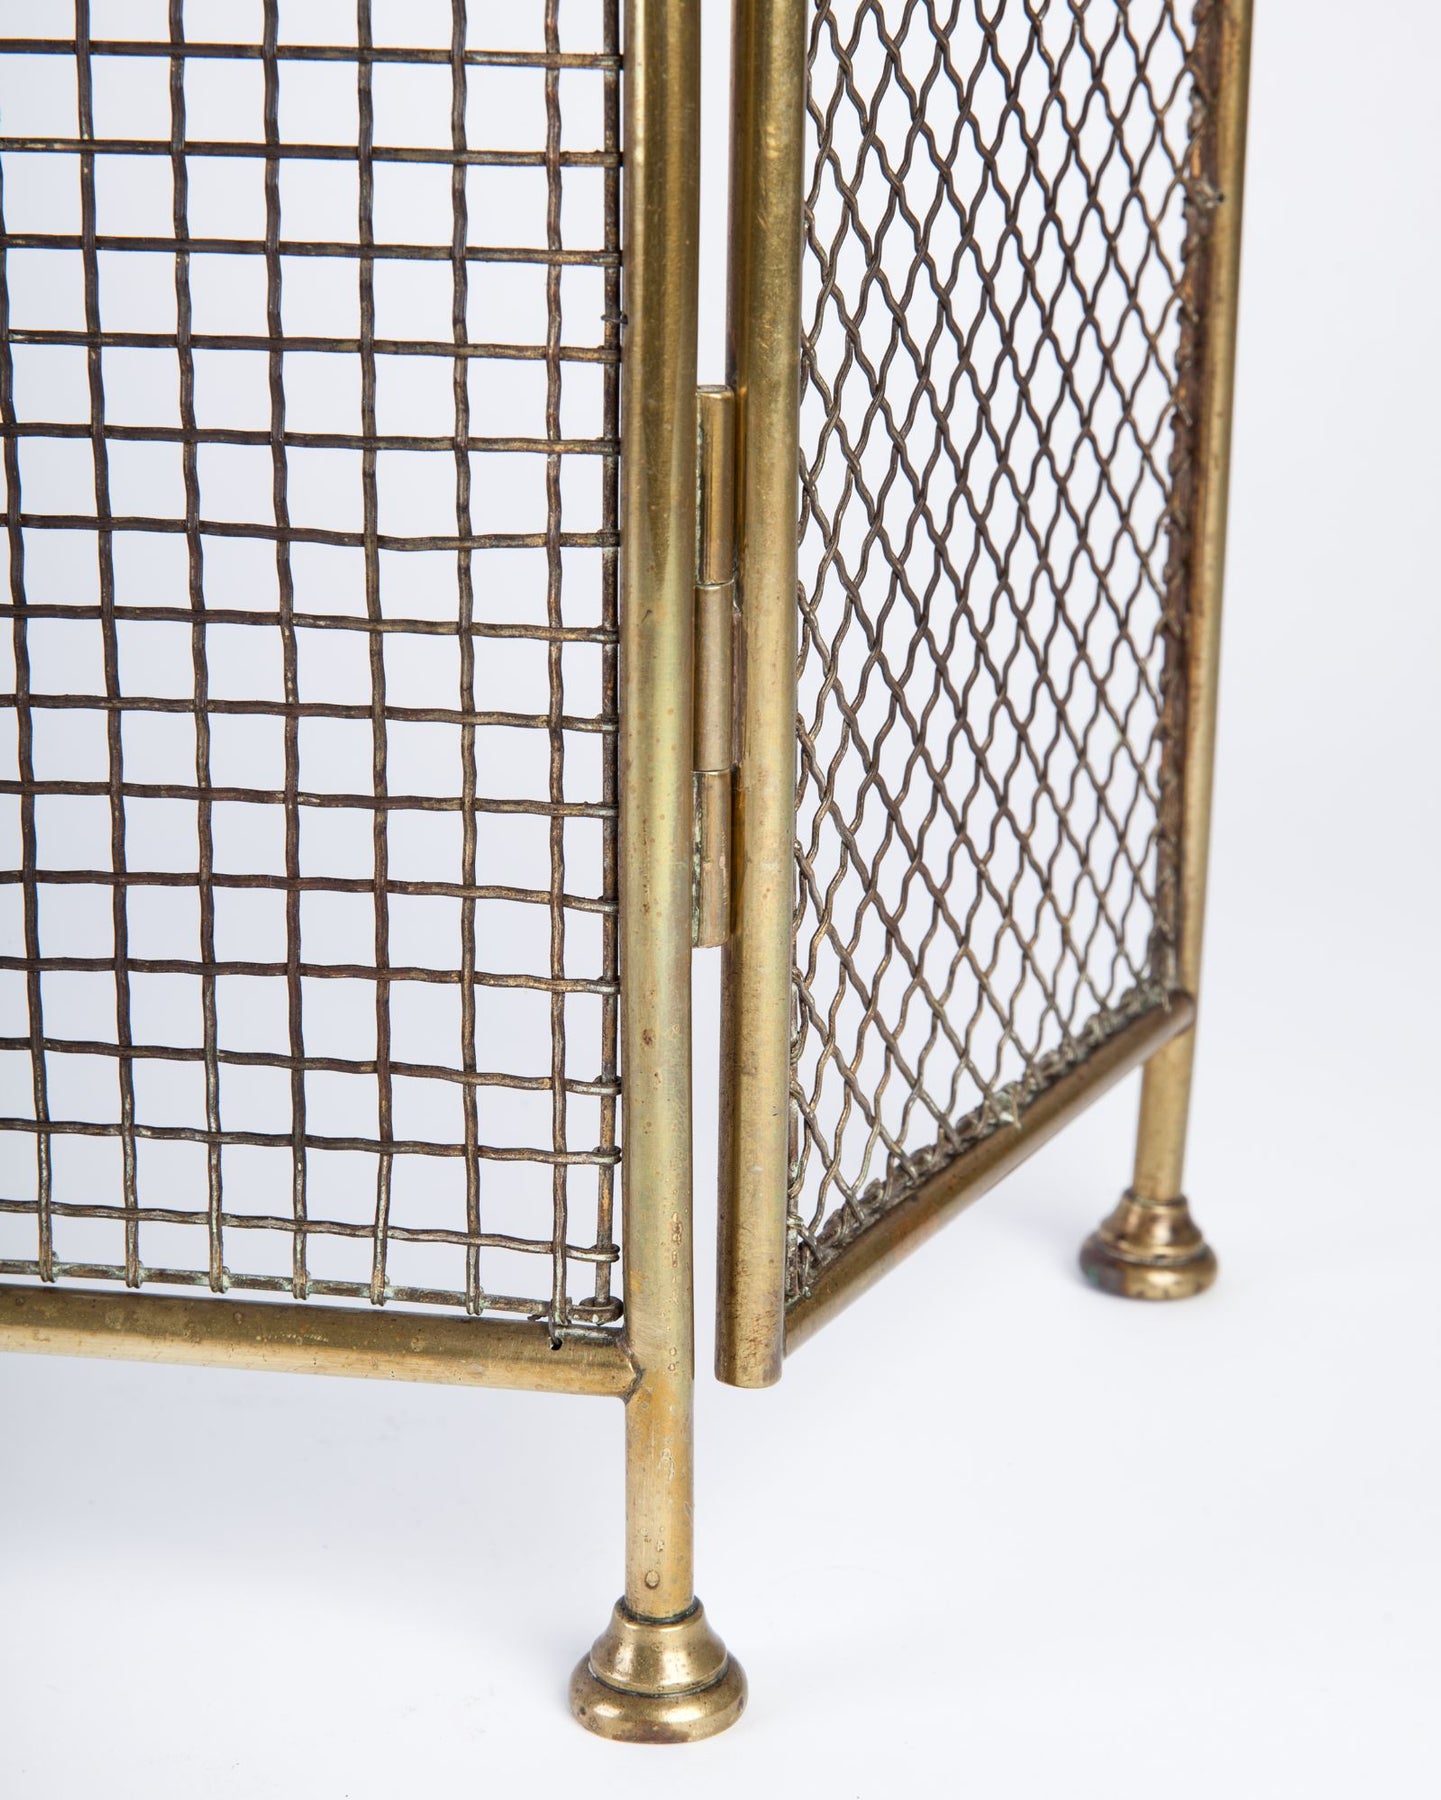 Brass Folding Fire Screen with Three Woven Wire Panels